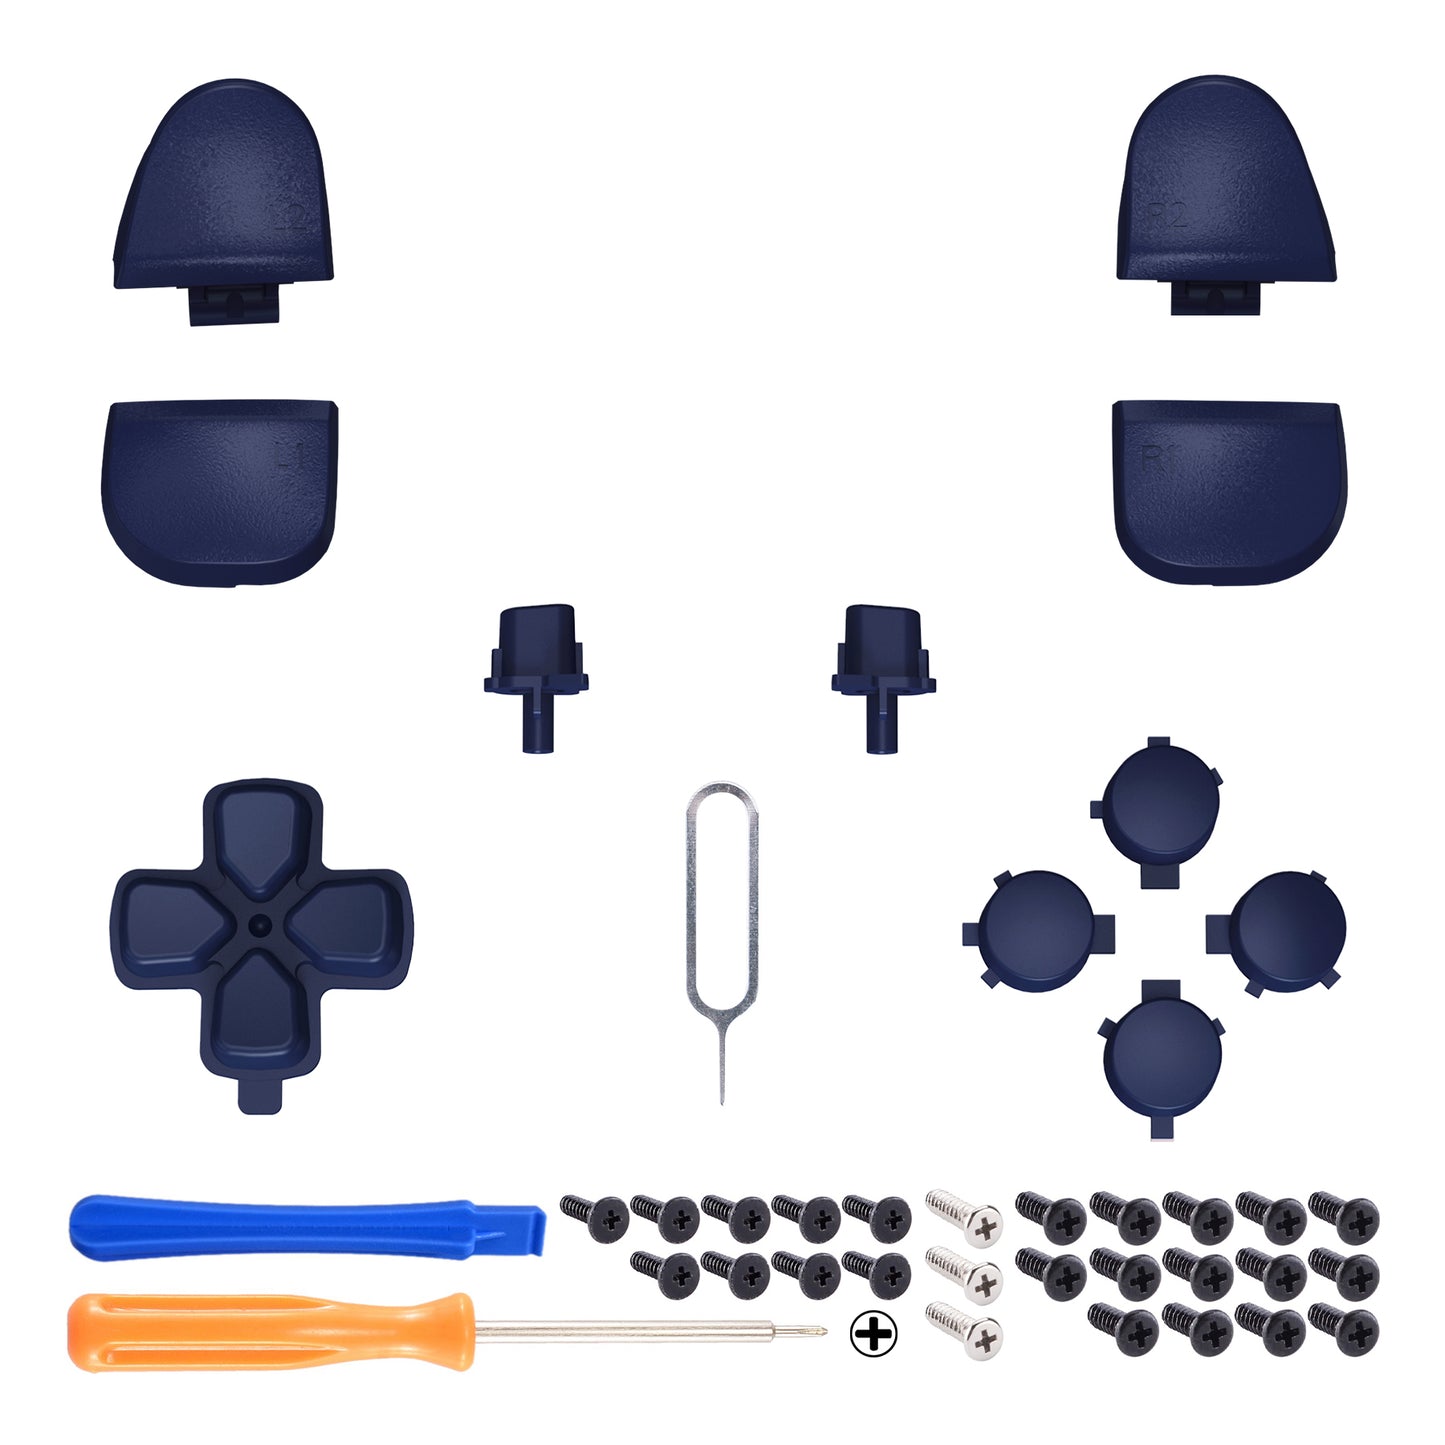 eXtremeRate Replacement Full Set Buttons Compatible with PS5 Controller BDM-030/040 - Midnight Blue eXtremeRate